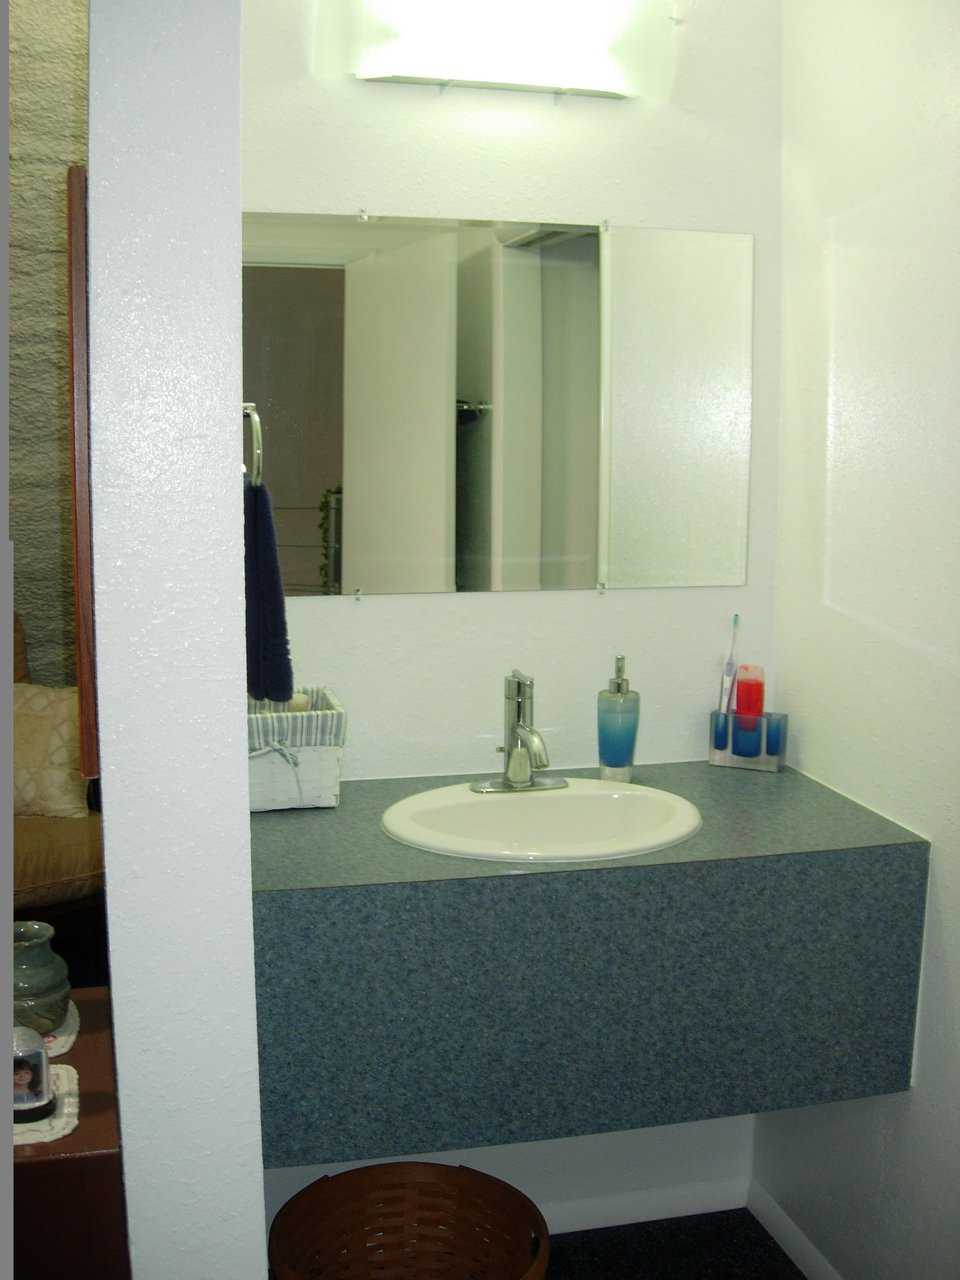 Bathroom is attractive and easily maintained.